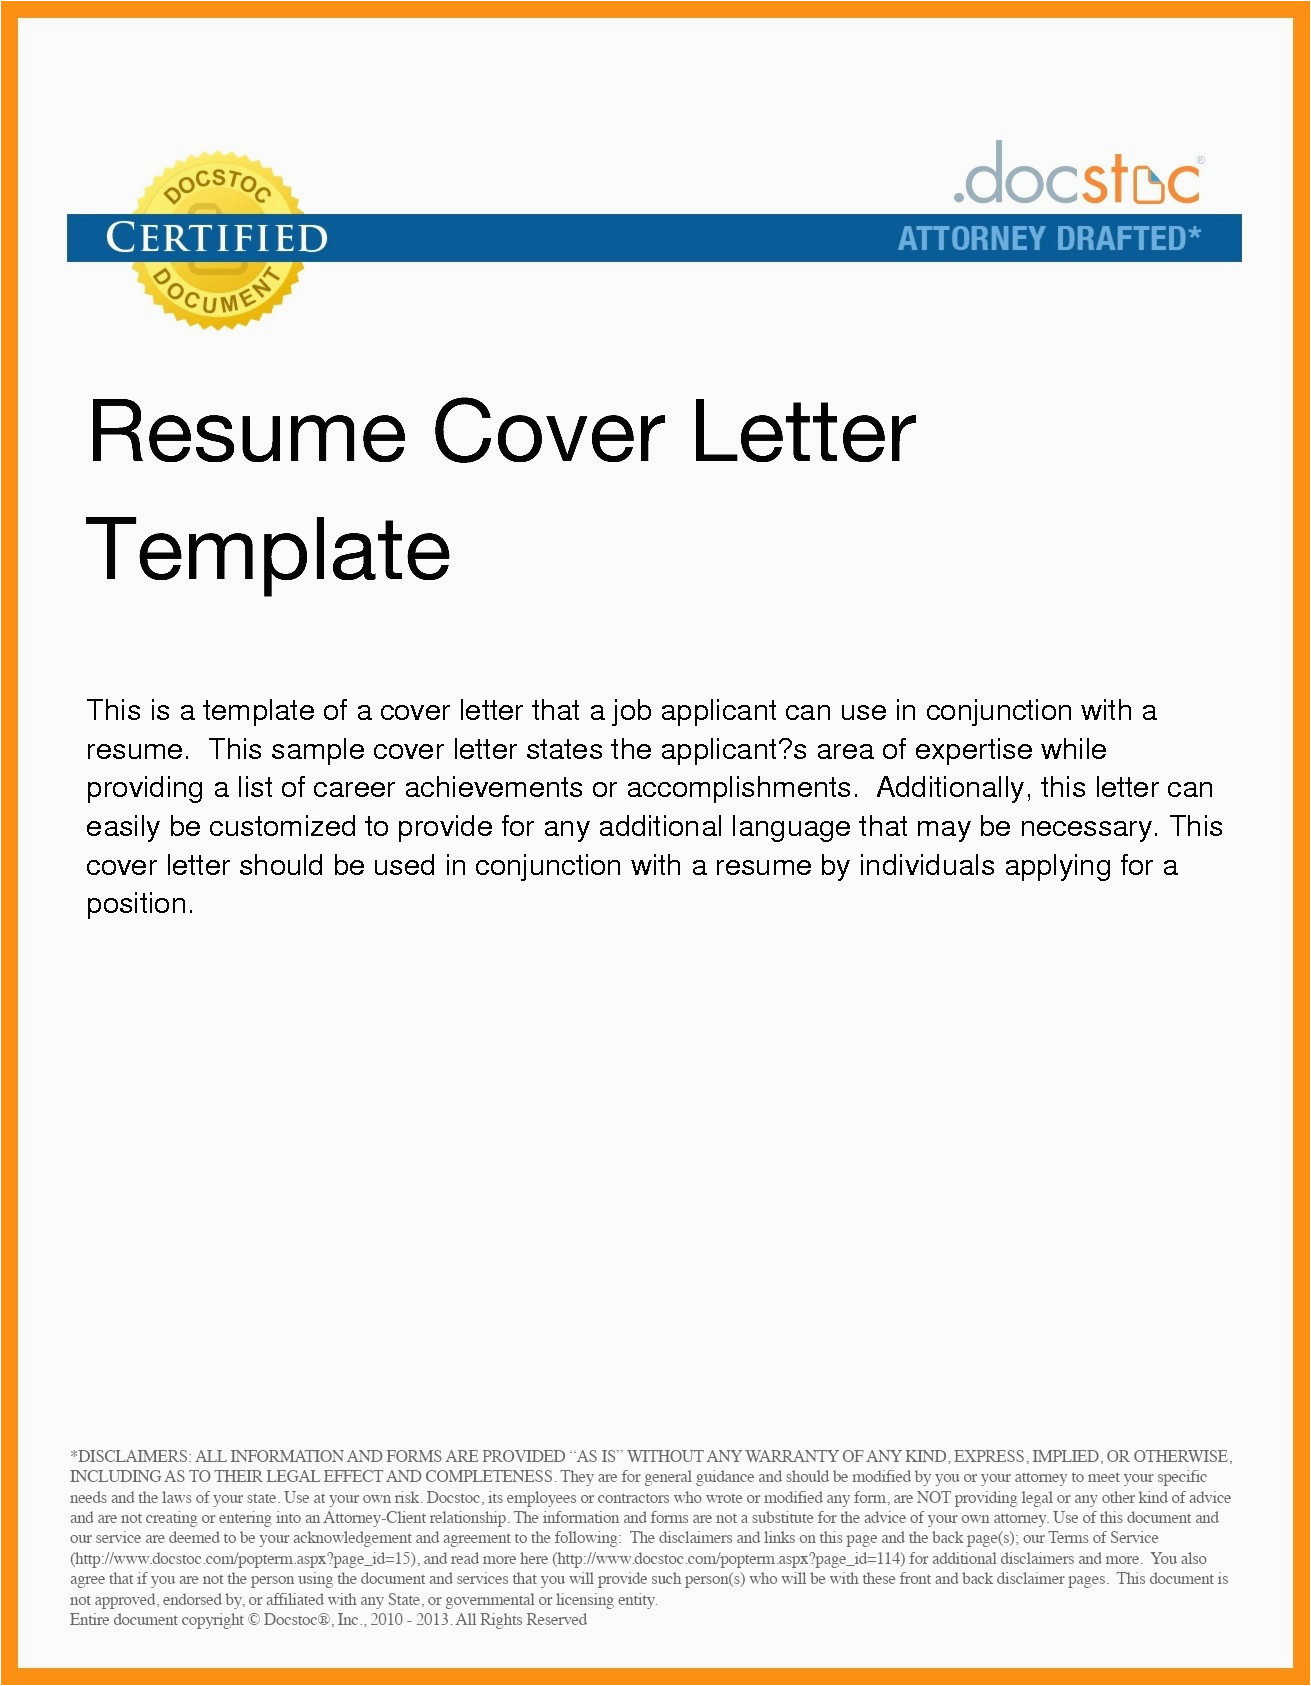 Email Letter for Sending Resume Sample Sending Resume and Cover Letter by Email Collection